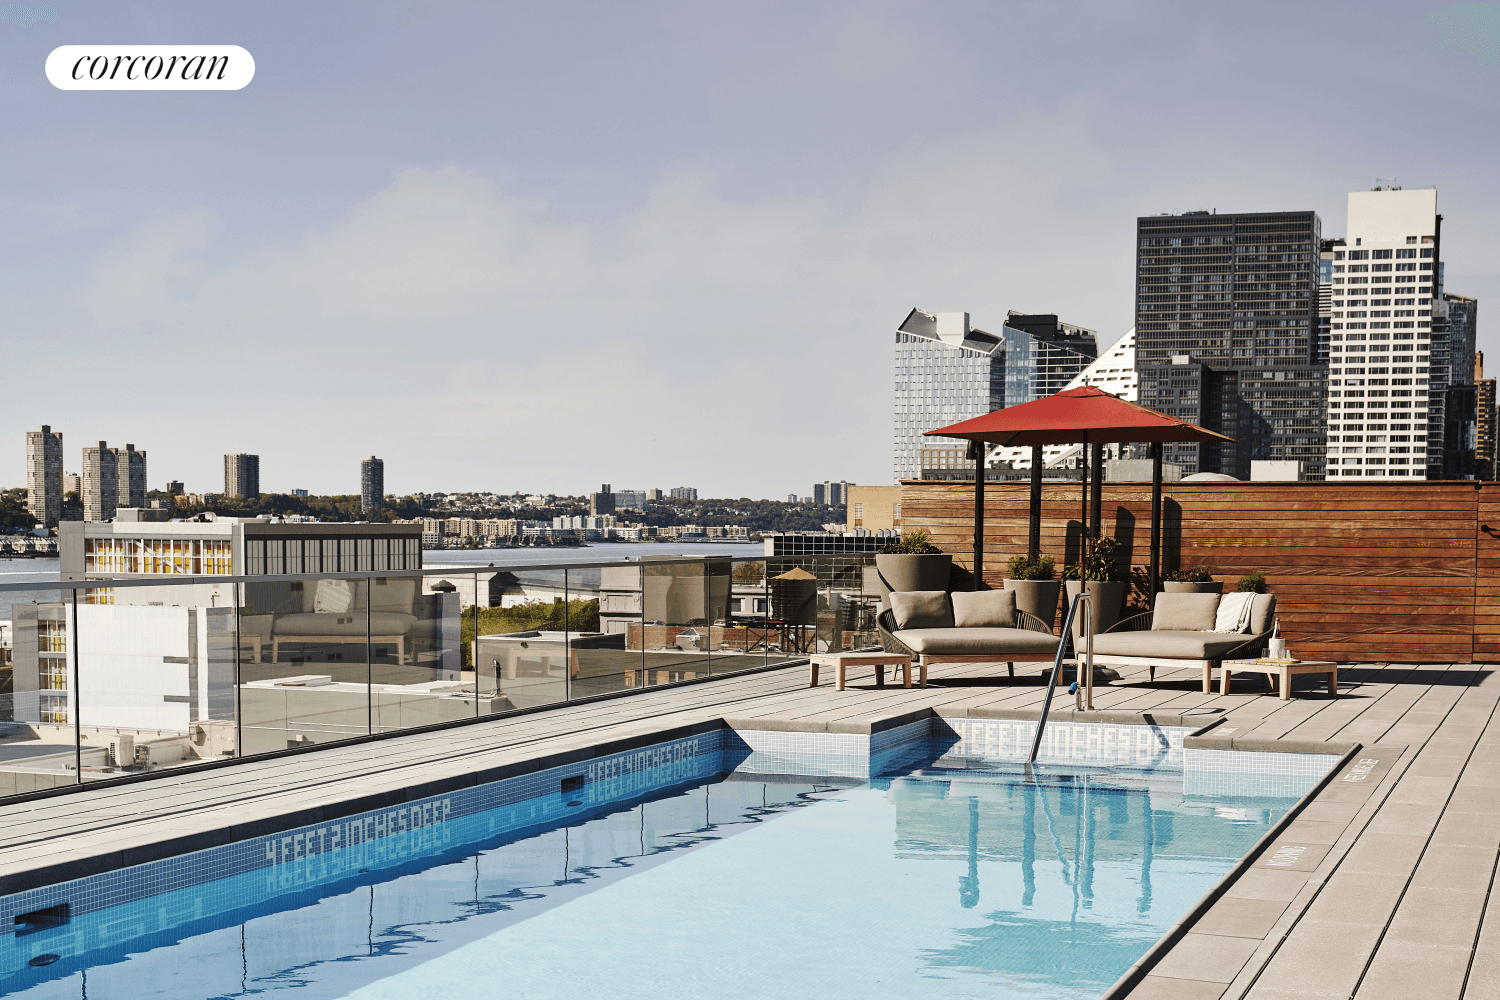 547 West 47th Street, 809The West Residence Club, Hell's Kitchen, New York, NY 10036Reduced Prices amp ; Reduced Closing Costs at The West Residence Club !